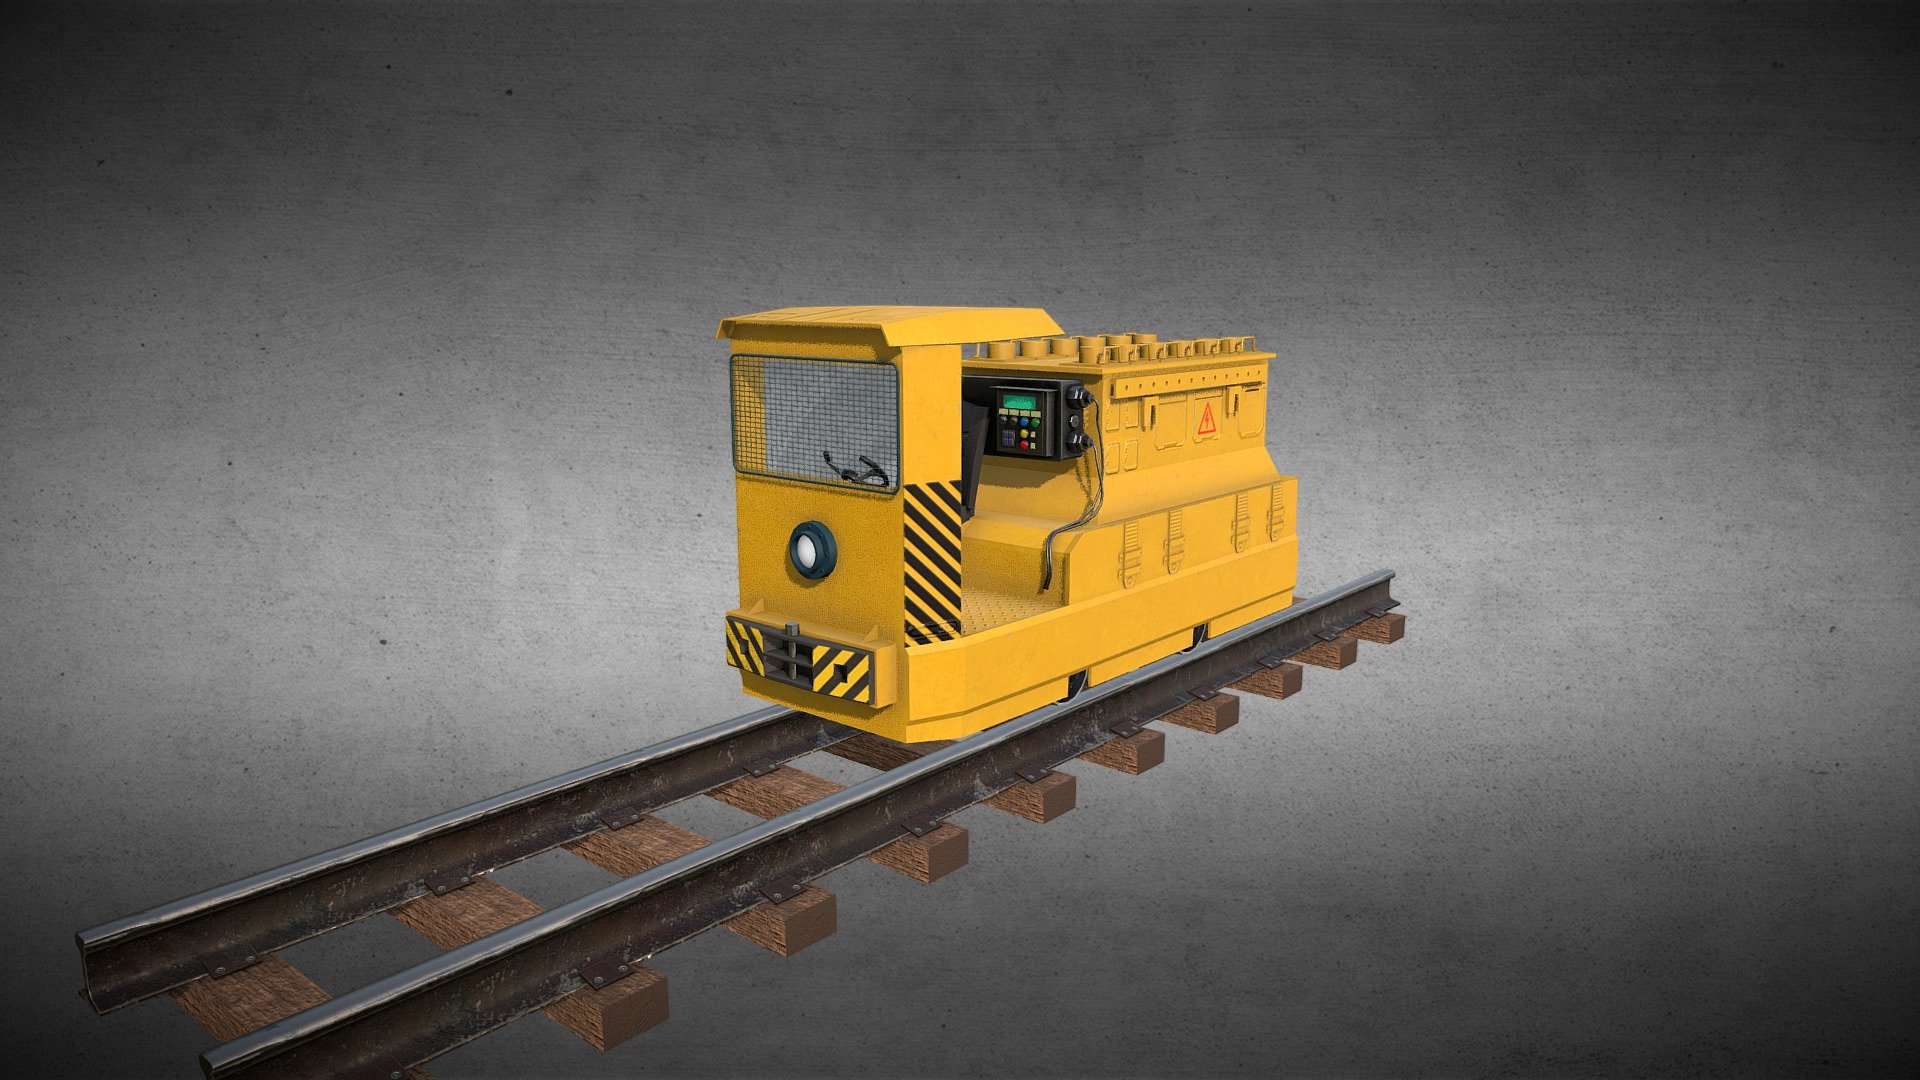 Mining Locomotive.

Available in Unity Asset Store - Mining Locomotive type "A" - 3D model by pavelmo4alov 3d model